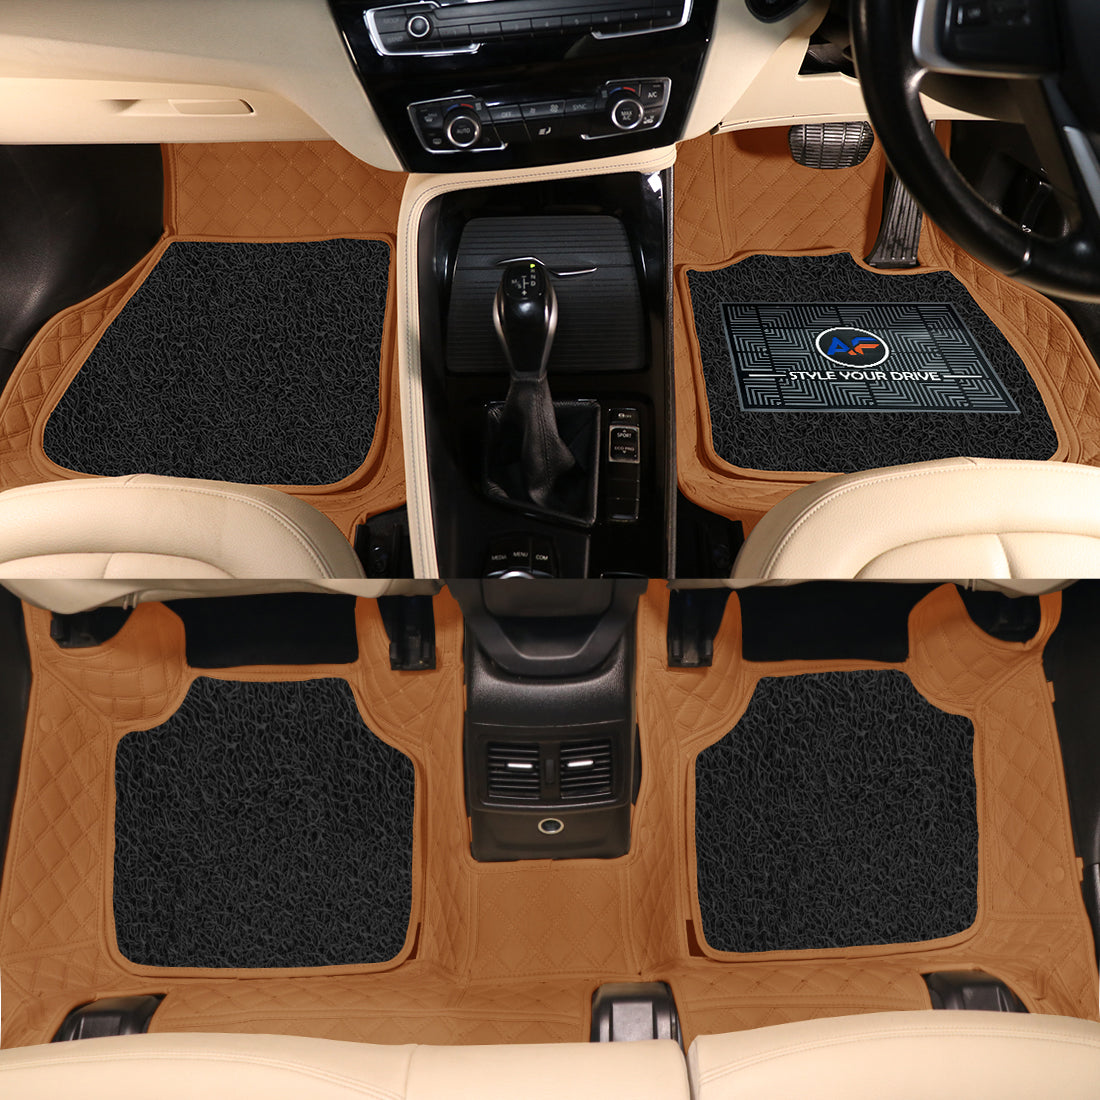 Mercedes S560 Maybach 2015 7D Luxury Car Mat, All Weather Proof, Anti-Skid, 100% Waterproof & Odorless with Unique Diamond Fish Design (24mm Luxury PU Leather, 2 Rows)